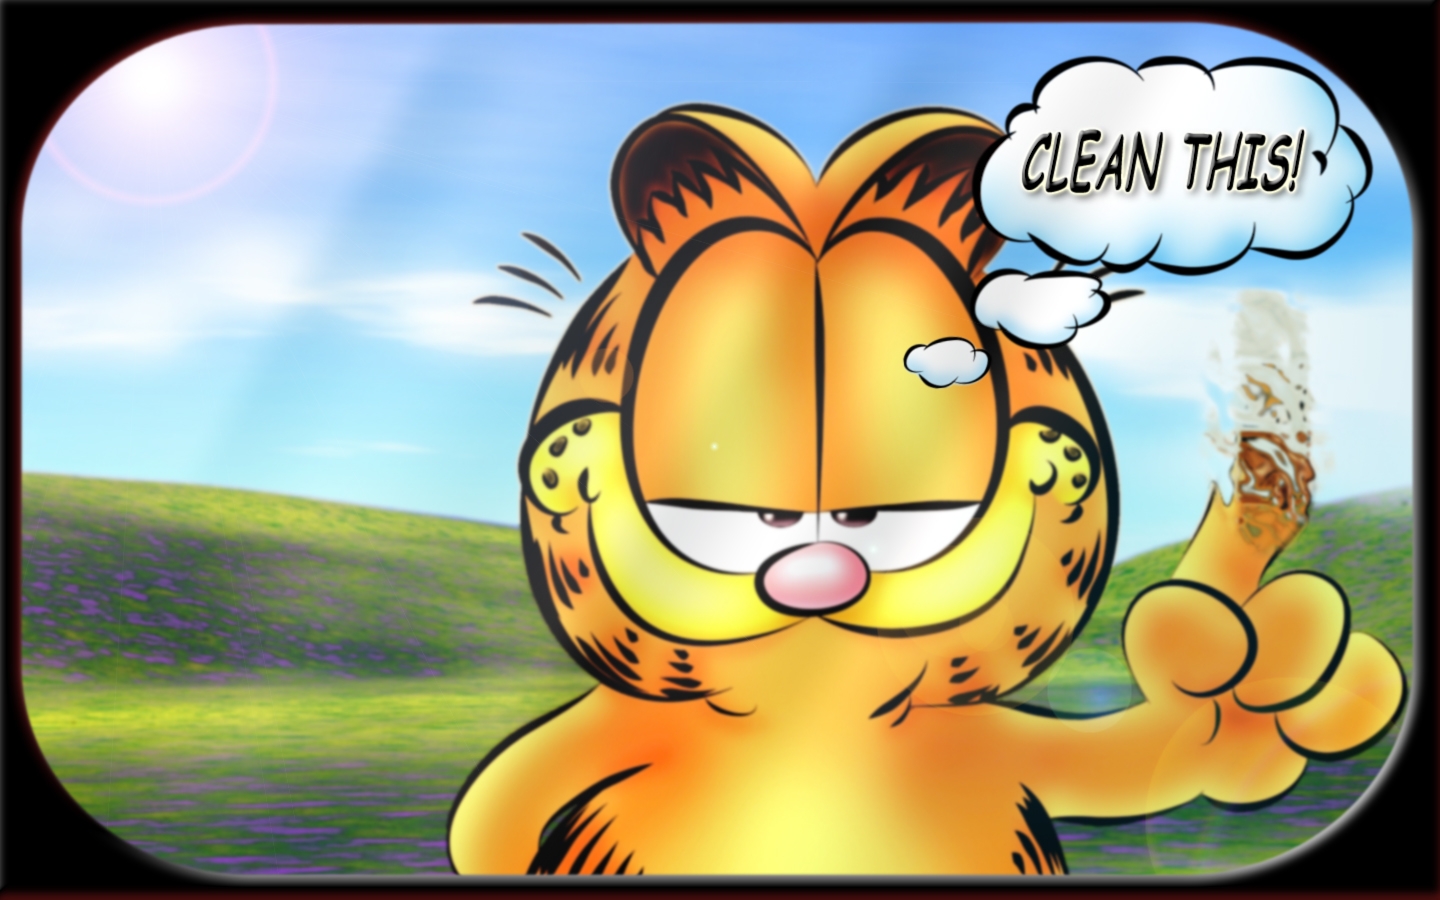 Free Download More Pc Wallpaper For Your Desktop Backgrounds 1440x900 For Your Desktop Mobile Tablet Explore 44 Garfield Wallpaper Downloads Garfield Wallpapers Downloads Garfield Wallpaper Downloads Garfield Wallpapers